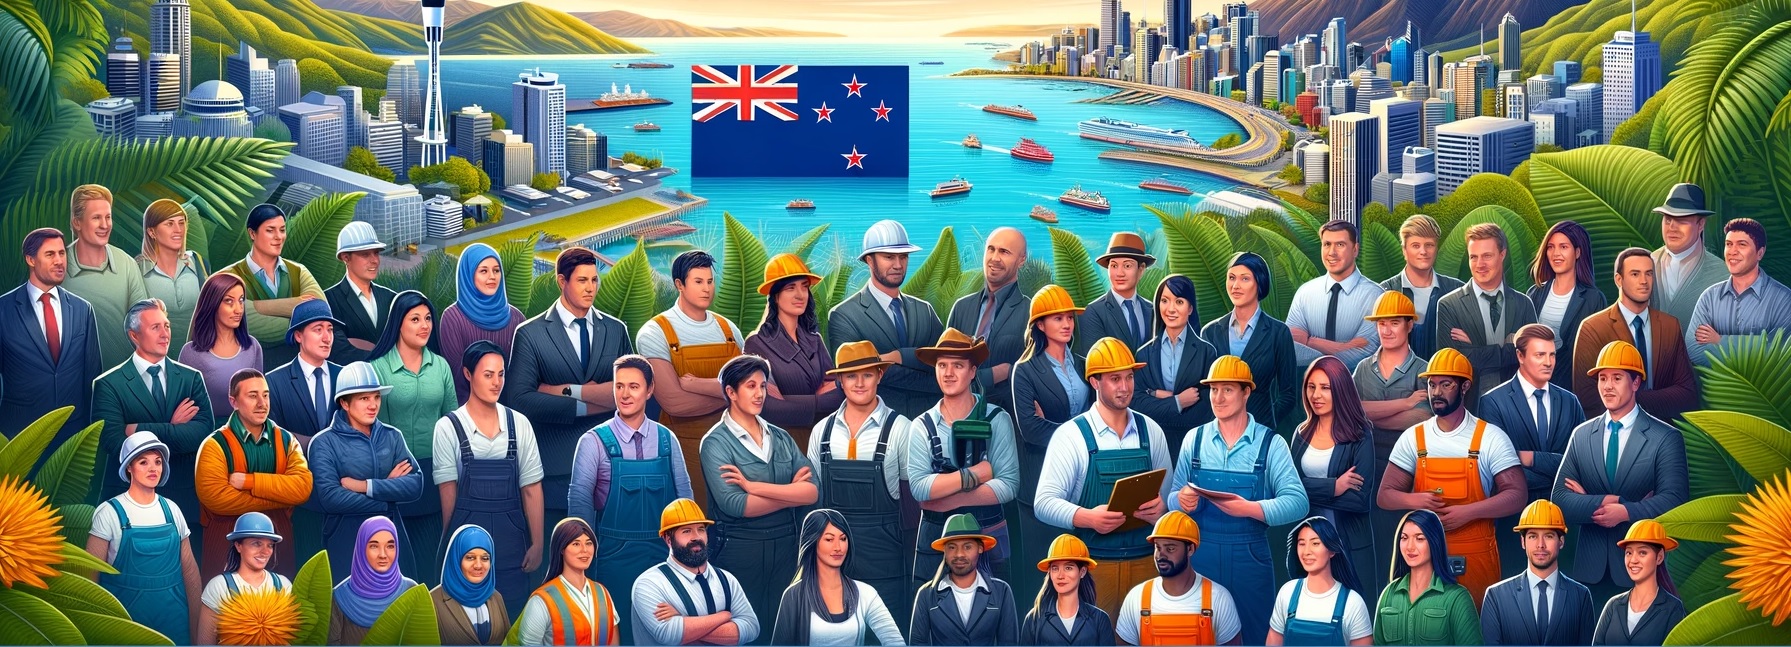 New Zealand's Accredited Employer Work Visa program, showcasing a diverse array of employees of various nationalities